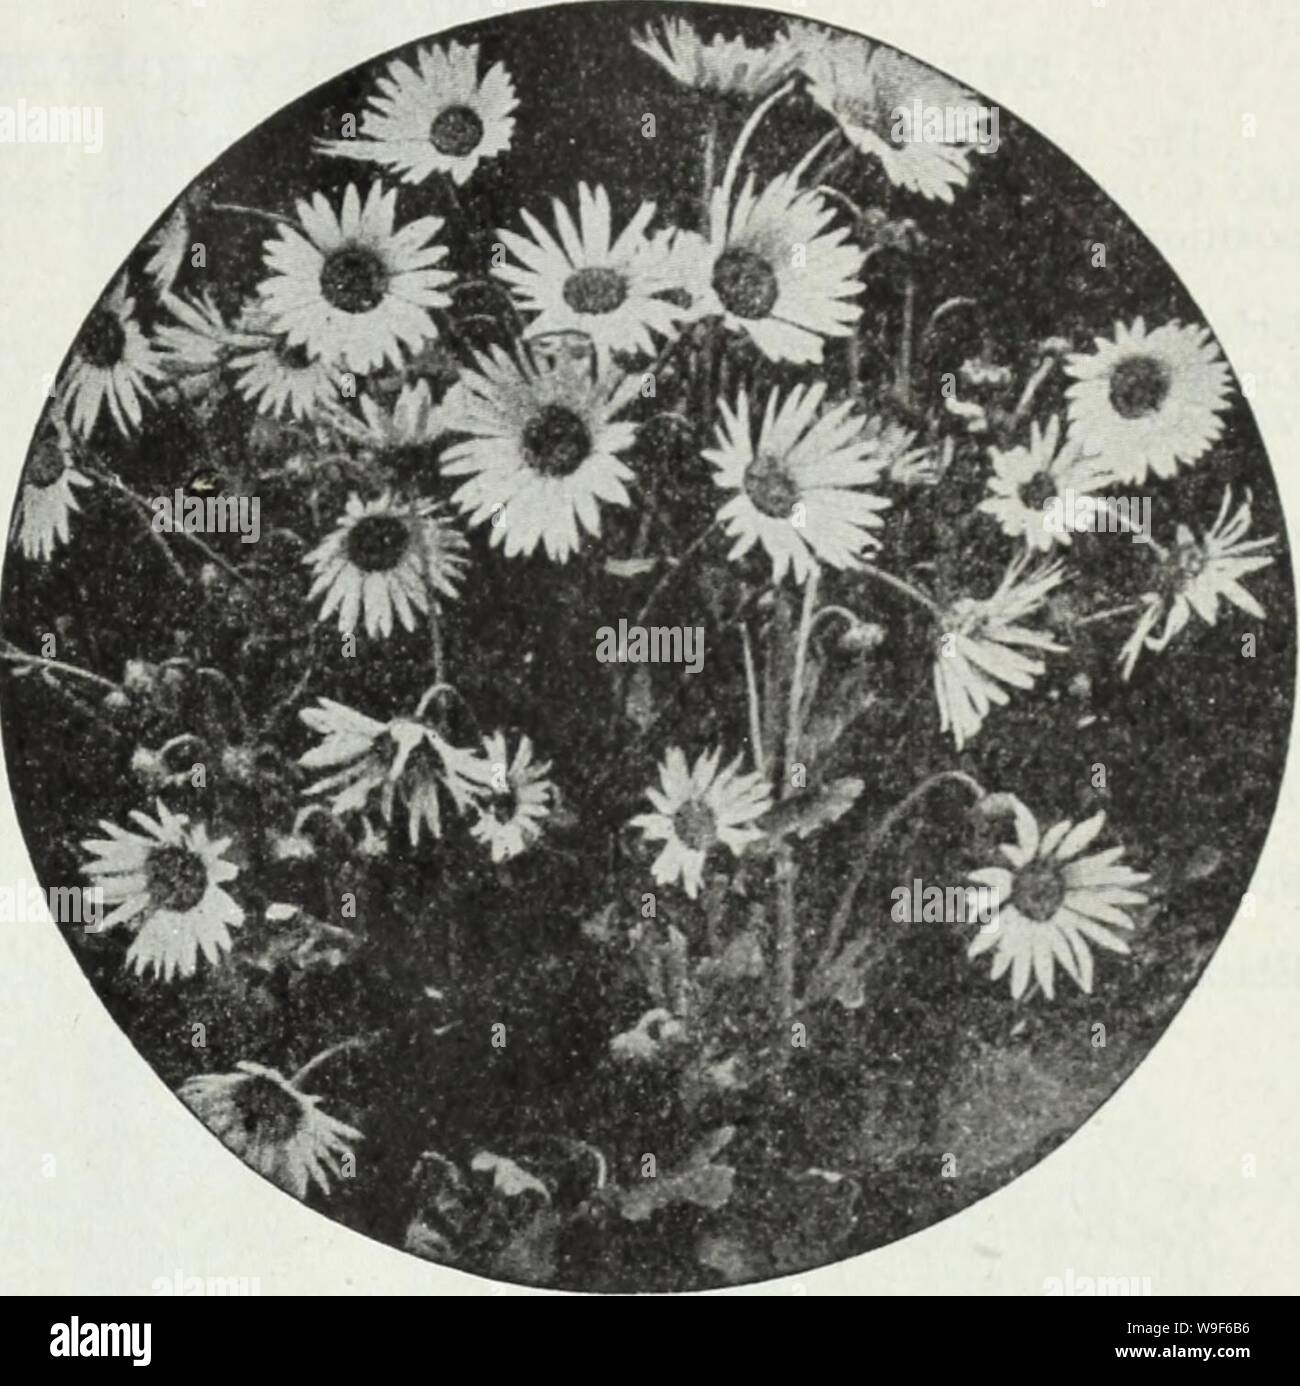 Archive image from page 18 of Currie's farm and garden annual. Currie's farm and garden annual : spring 1930  curriesfarmgarde19curr Year: 1930 ( Arctotis Grandis. ASPARAGUS Plumosus Nanus (Asparagus Fern)—Graceful plants, easily grown in the dwelling house. Pkt. (15 seeds), 10c. Sprengeri (Emerald Feather)—A pretty plant for pot culture with drooping fronds.. Pkt., 10c; 100 seeds, 25c. ARMERIA (SEA PINK OR THRIFT) Laucheana—Bright rosy red, 3-6 inches. May-June Pkt. .$0.15 ARENARIA (SANDWORT) Montana—Close tufts, profusely covered with small silvery white flowers early in the season 15 ARABIS Stock Photo